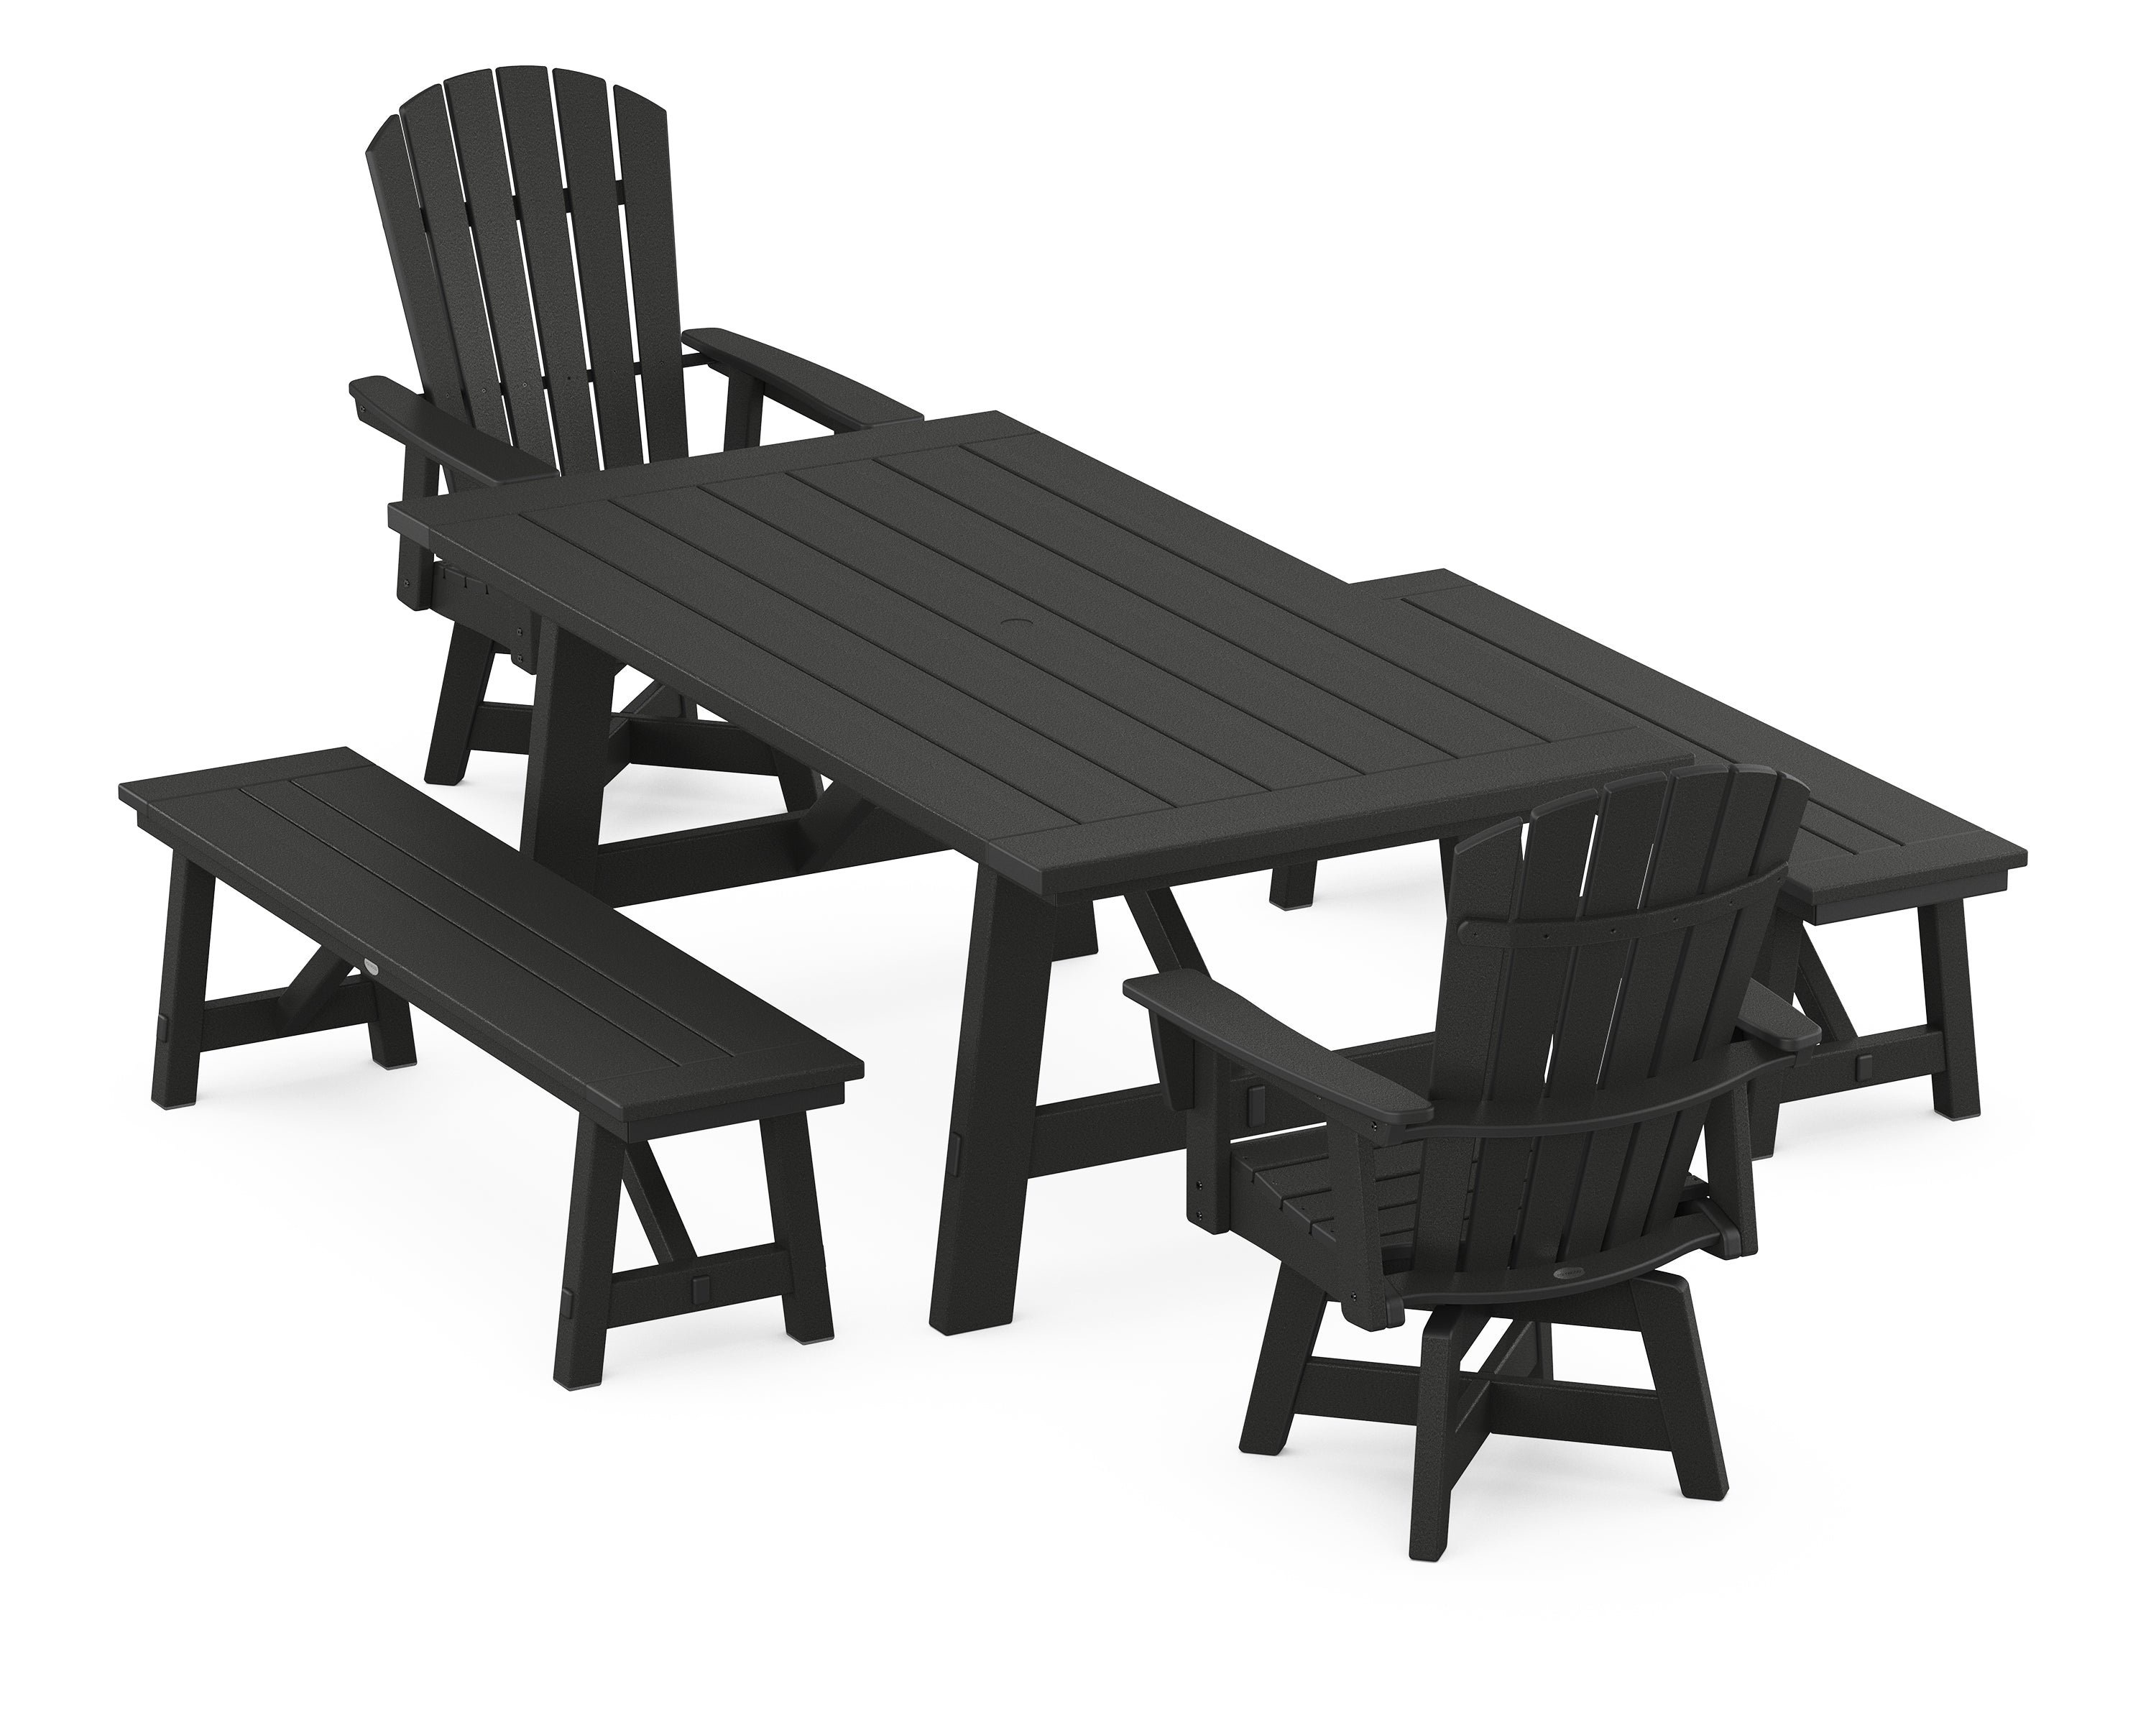 POLYWOOD® Nautical Curveback Adirondack Swivel Chair 5-Piece Rustic Farmhouse Dining Set With Benches in Black